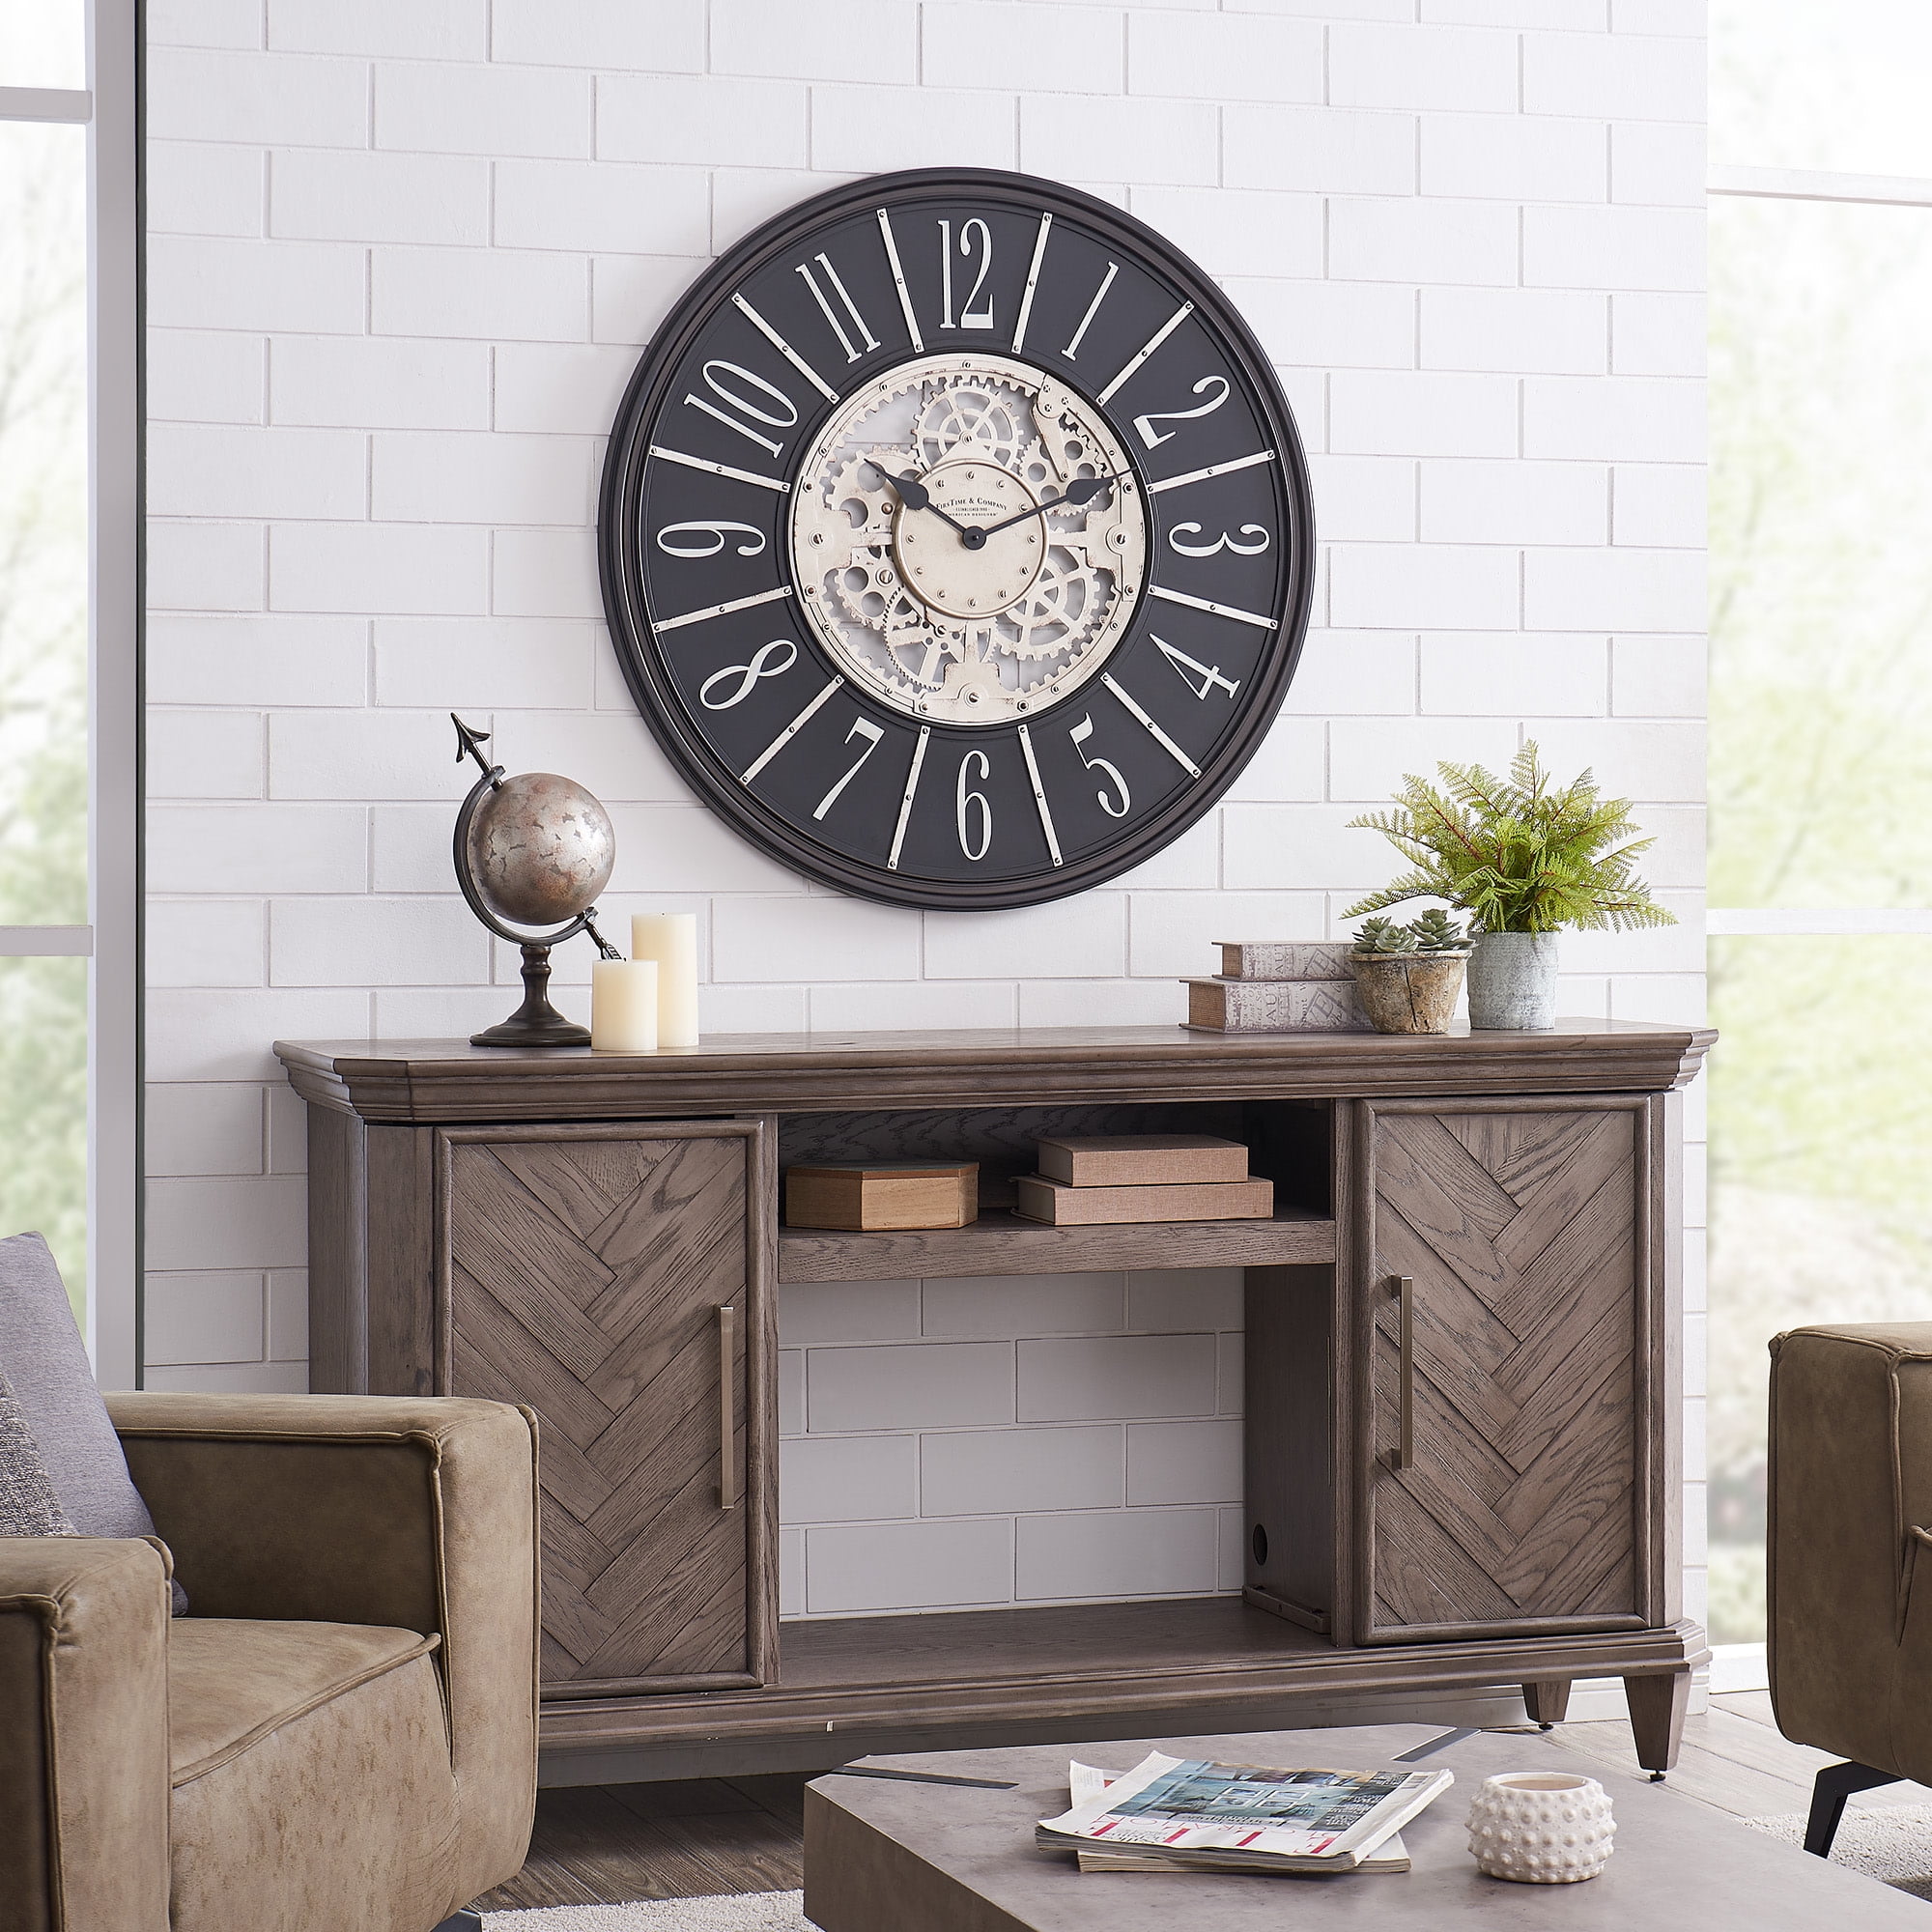 Gift for Him : Living Nostalgia French Grey Wall Clock 25.5